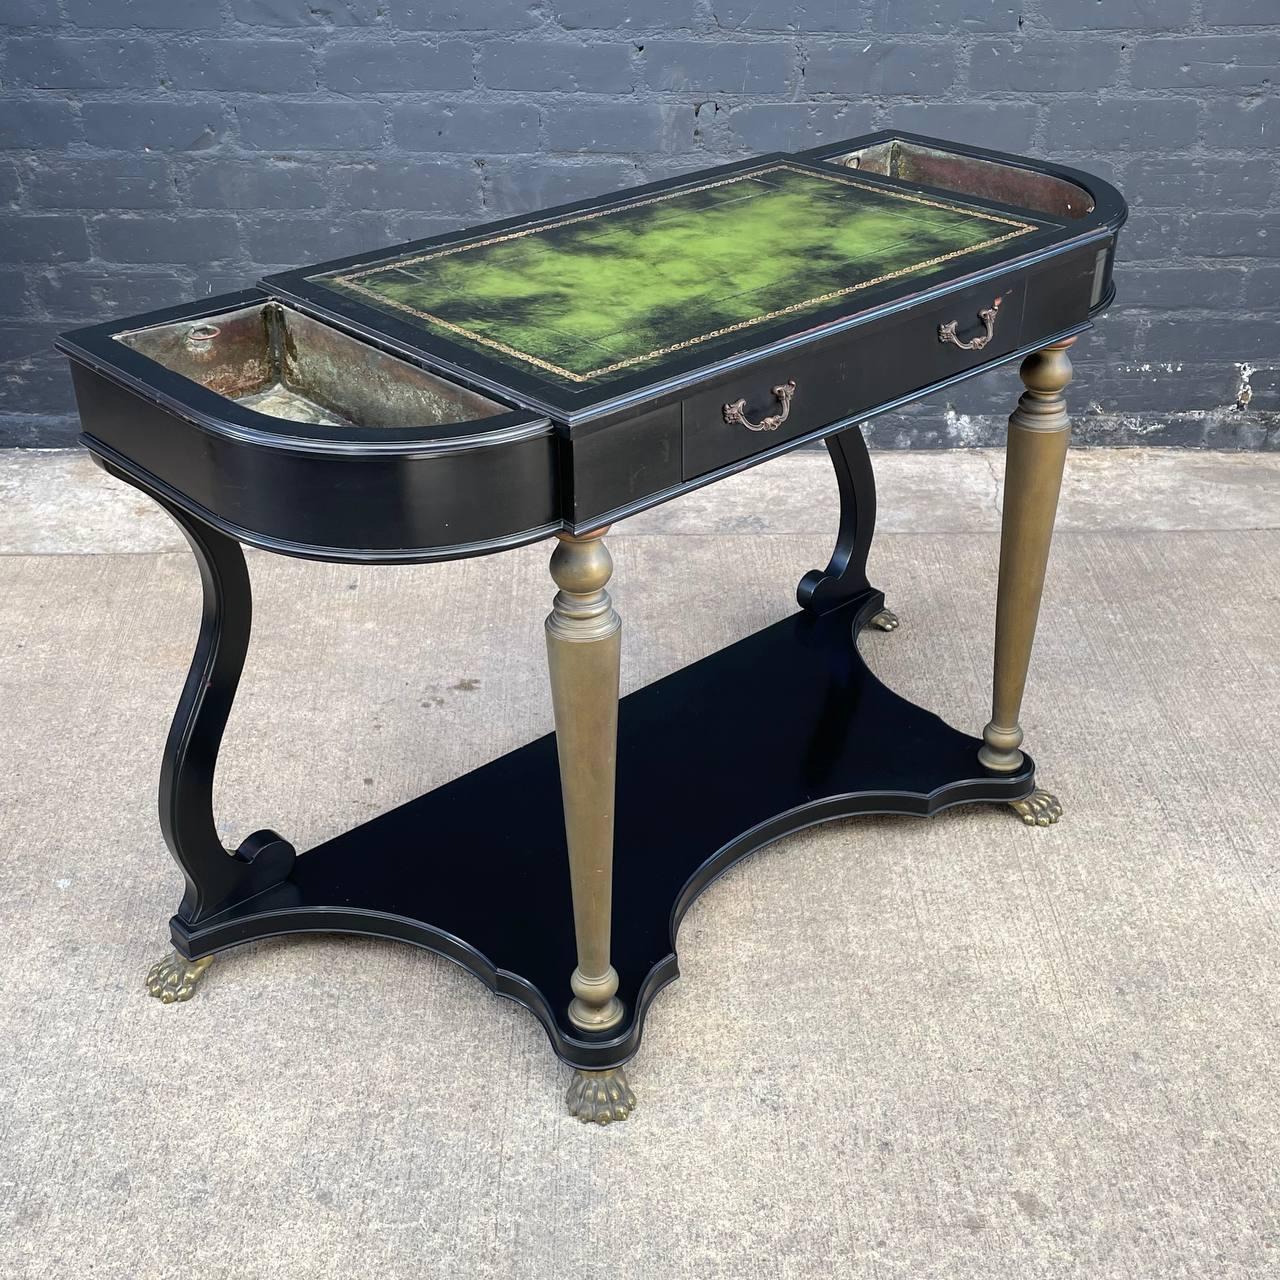 French Neoclassical Ebonized & Leather Top Console Table with Planter and Brass Claw Feet

Original Vintage Condition
Materials: Ebonized Wood, Leather Top, Patinated Brass
Dimensions: 31”H x 48”W x 19.75”D
